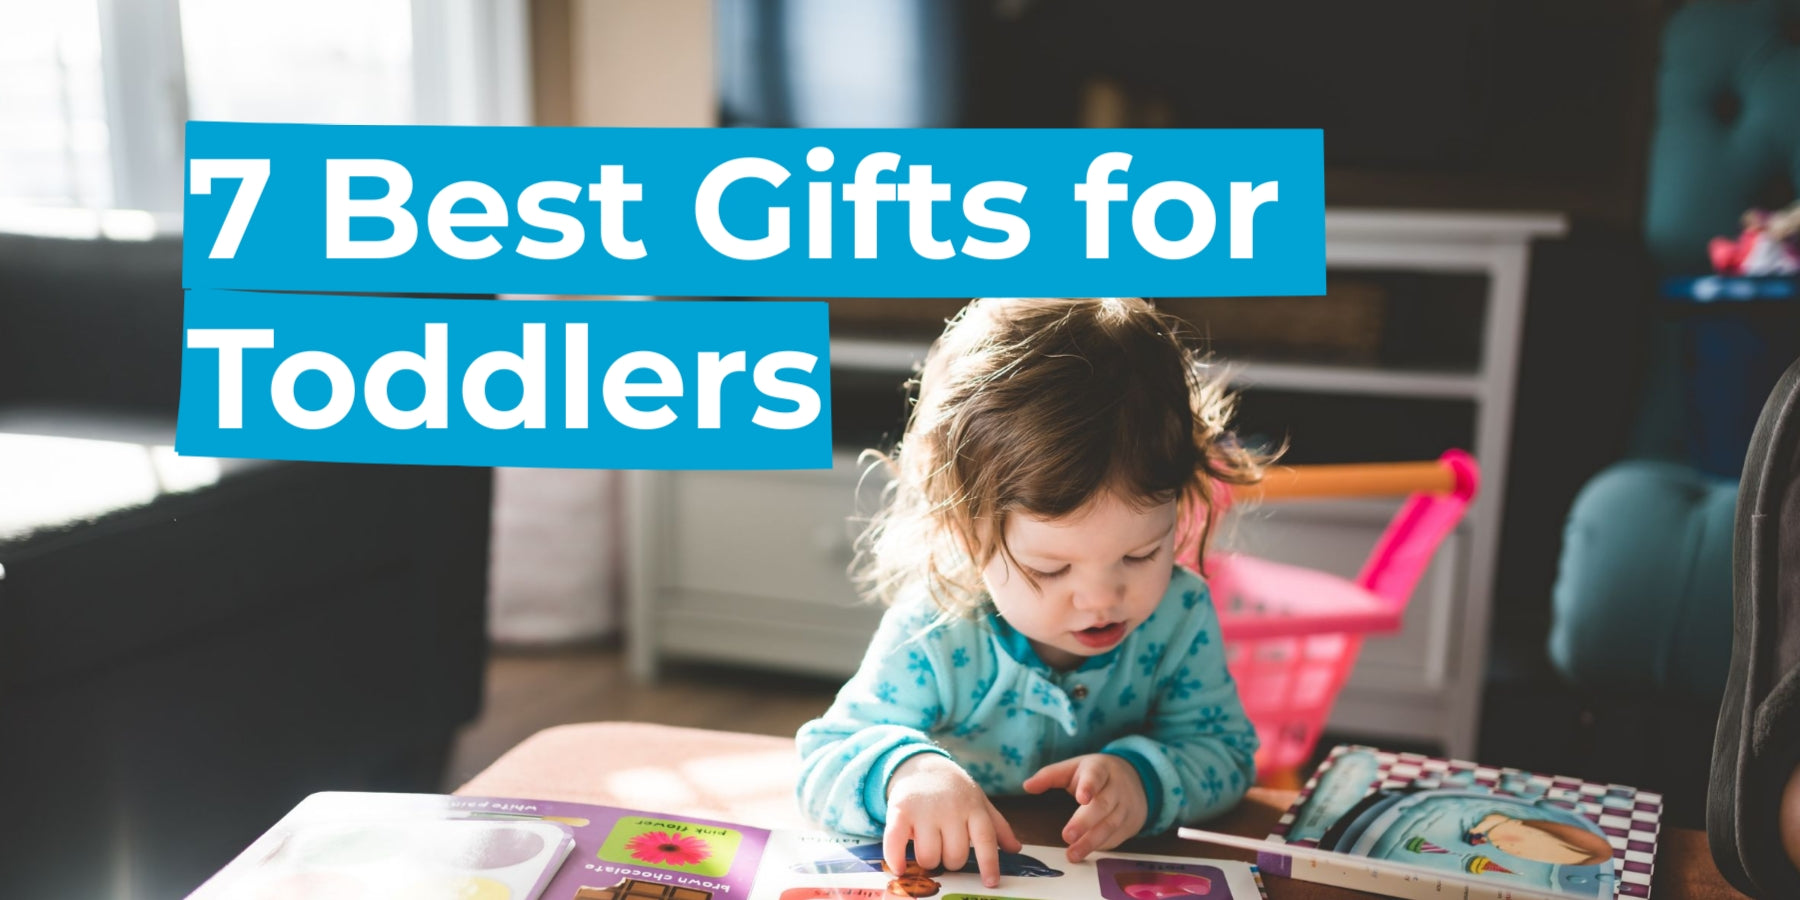 7 Best Gifts for Toddlers KIDZA